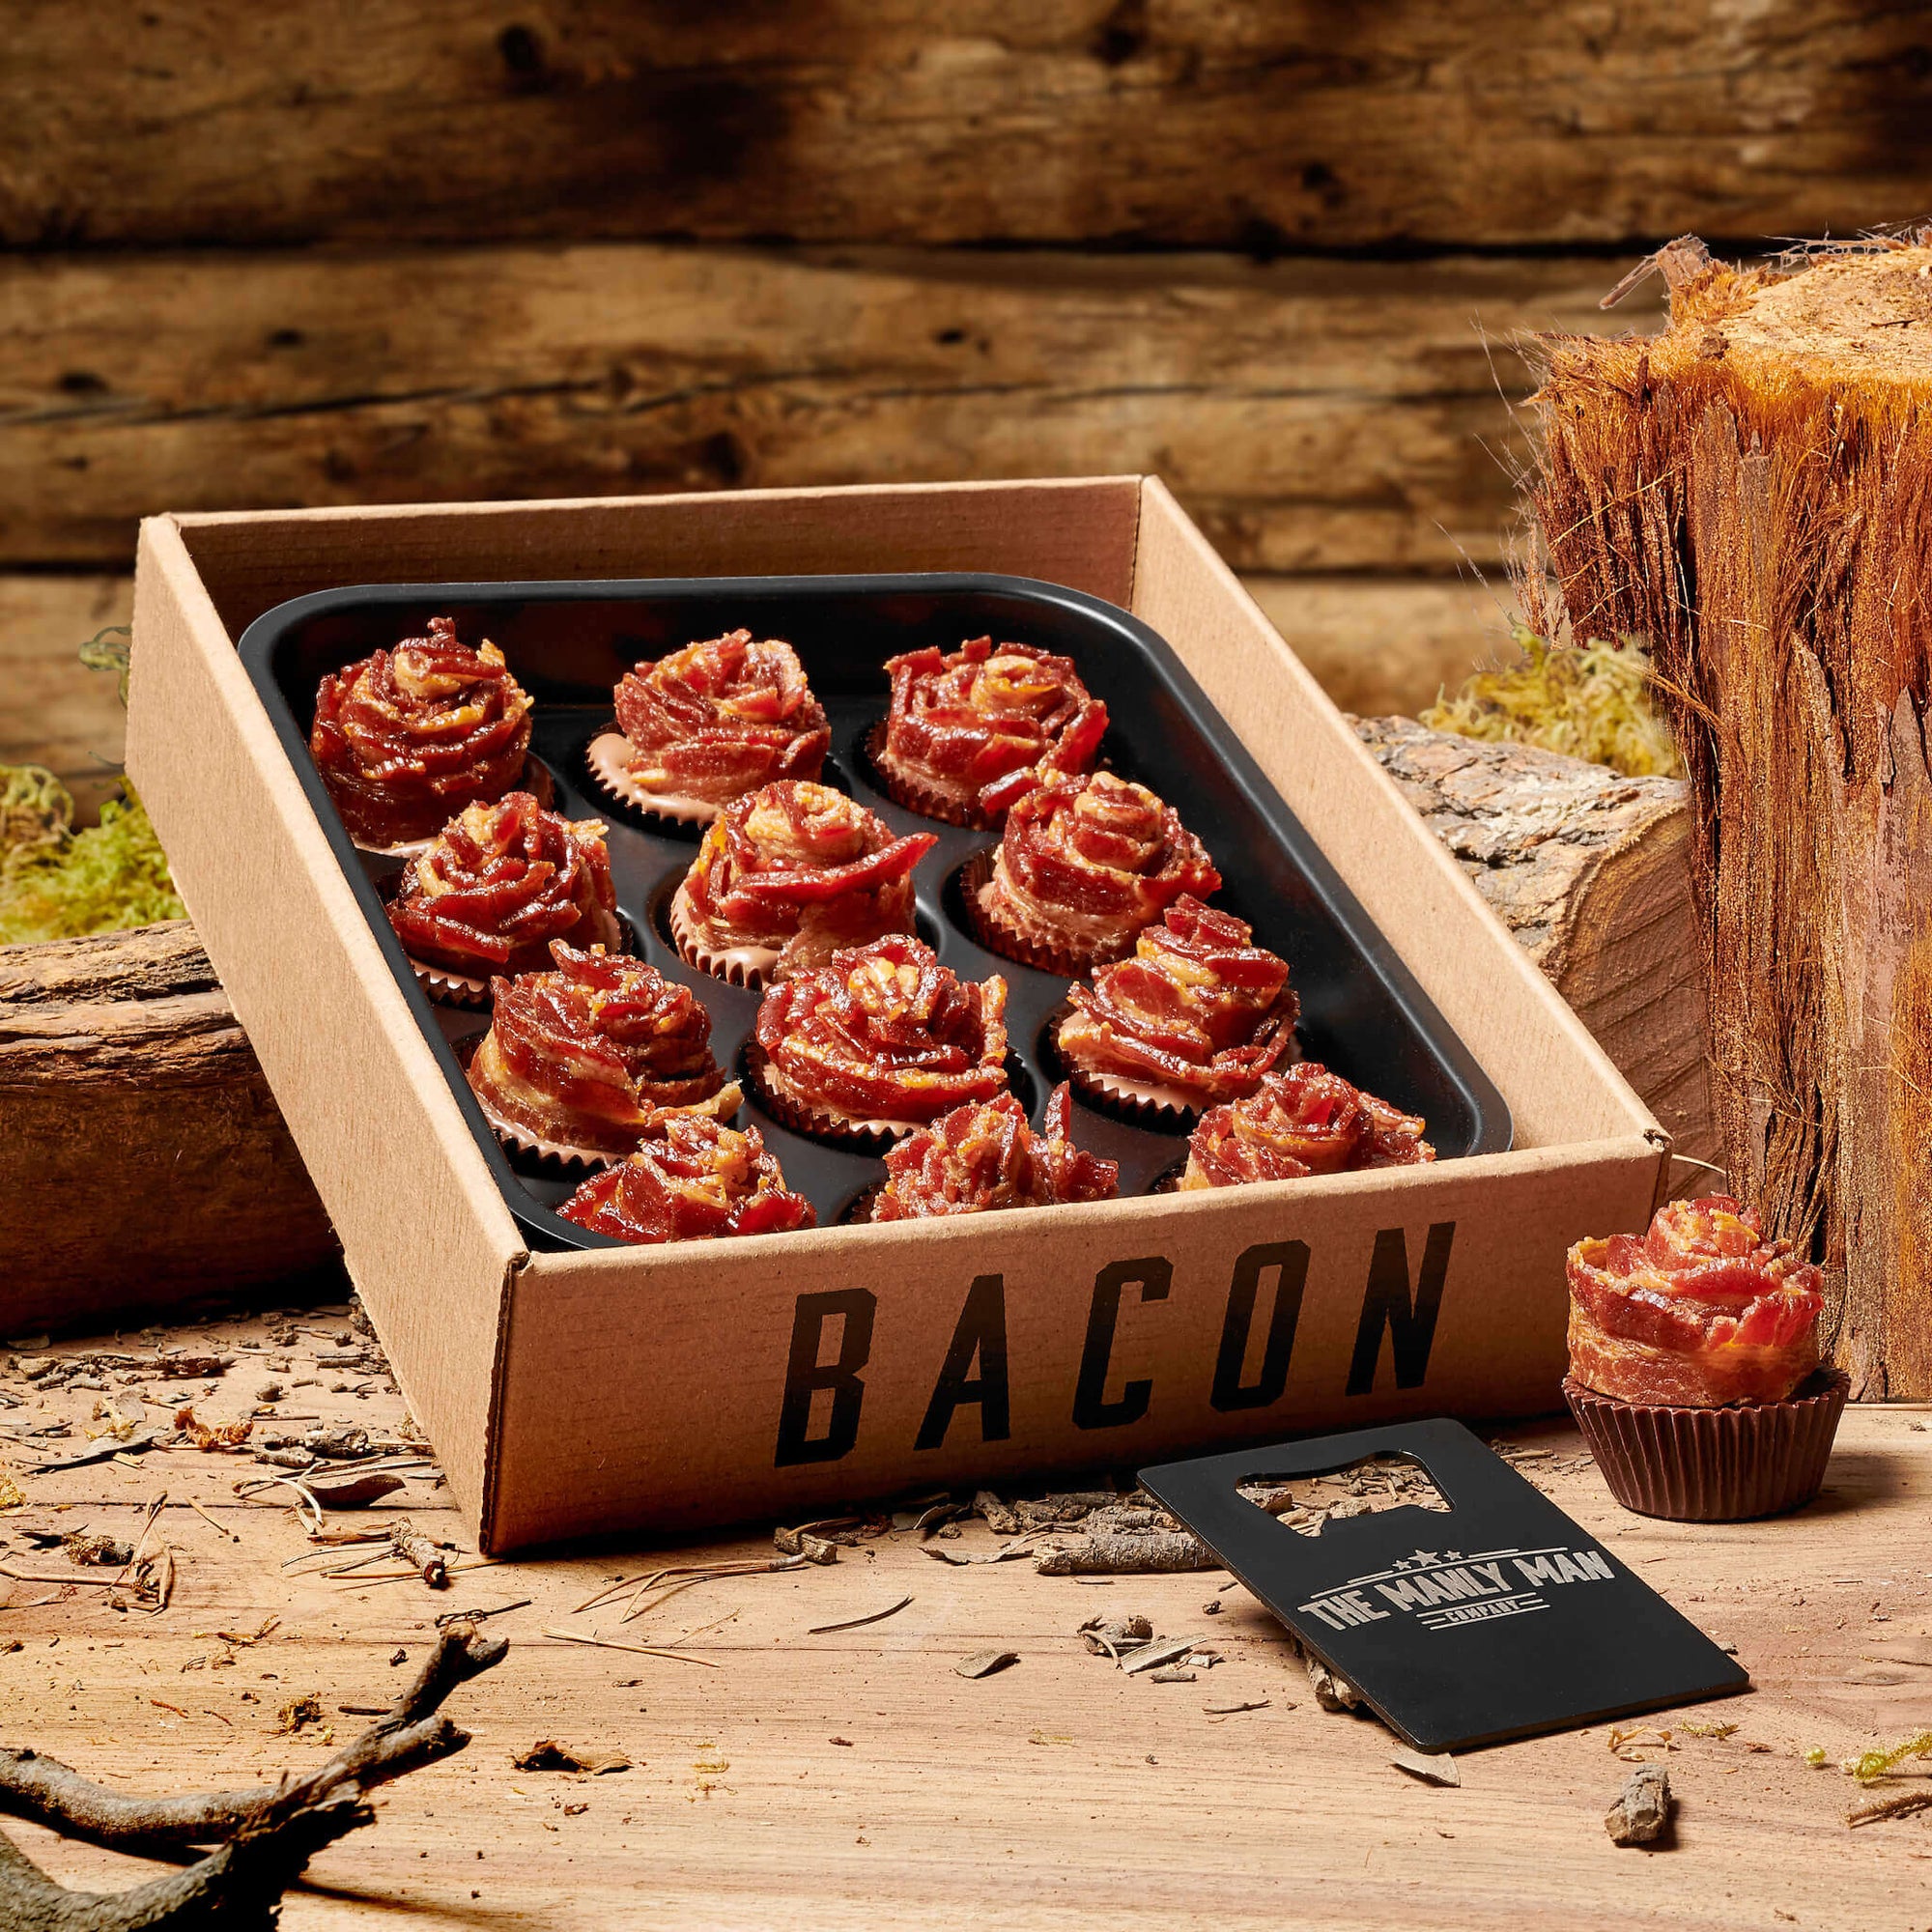 Bacon rose bouquets sitting behind man card and staged in front of log cabin background